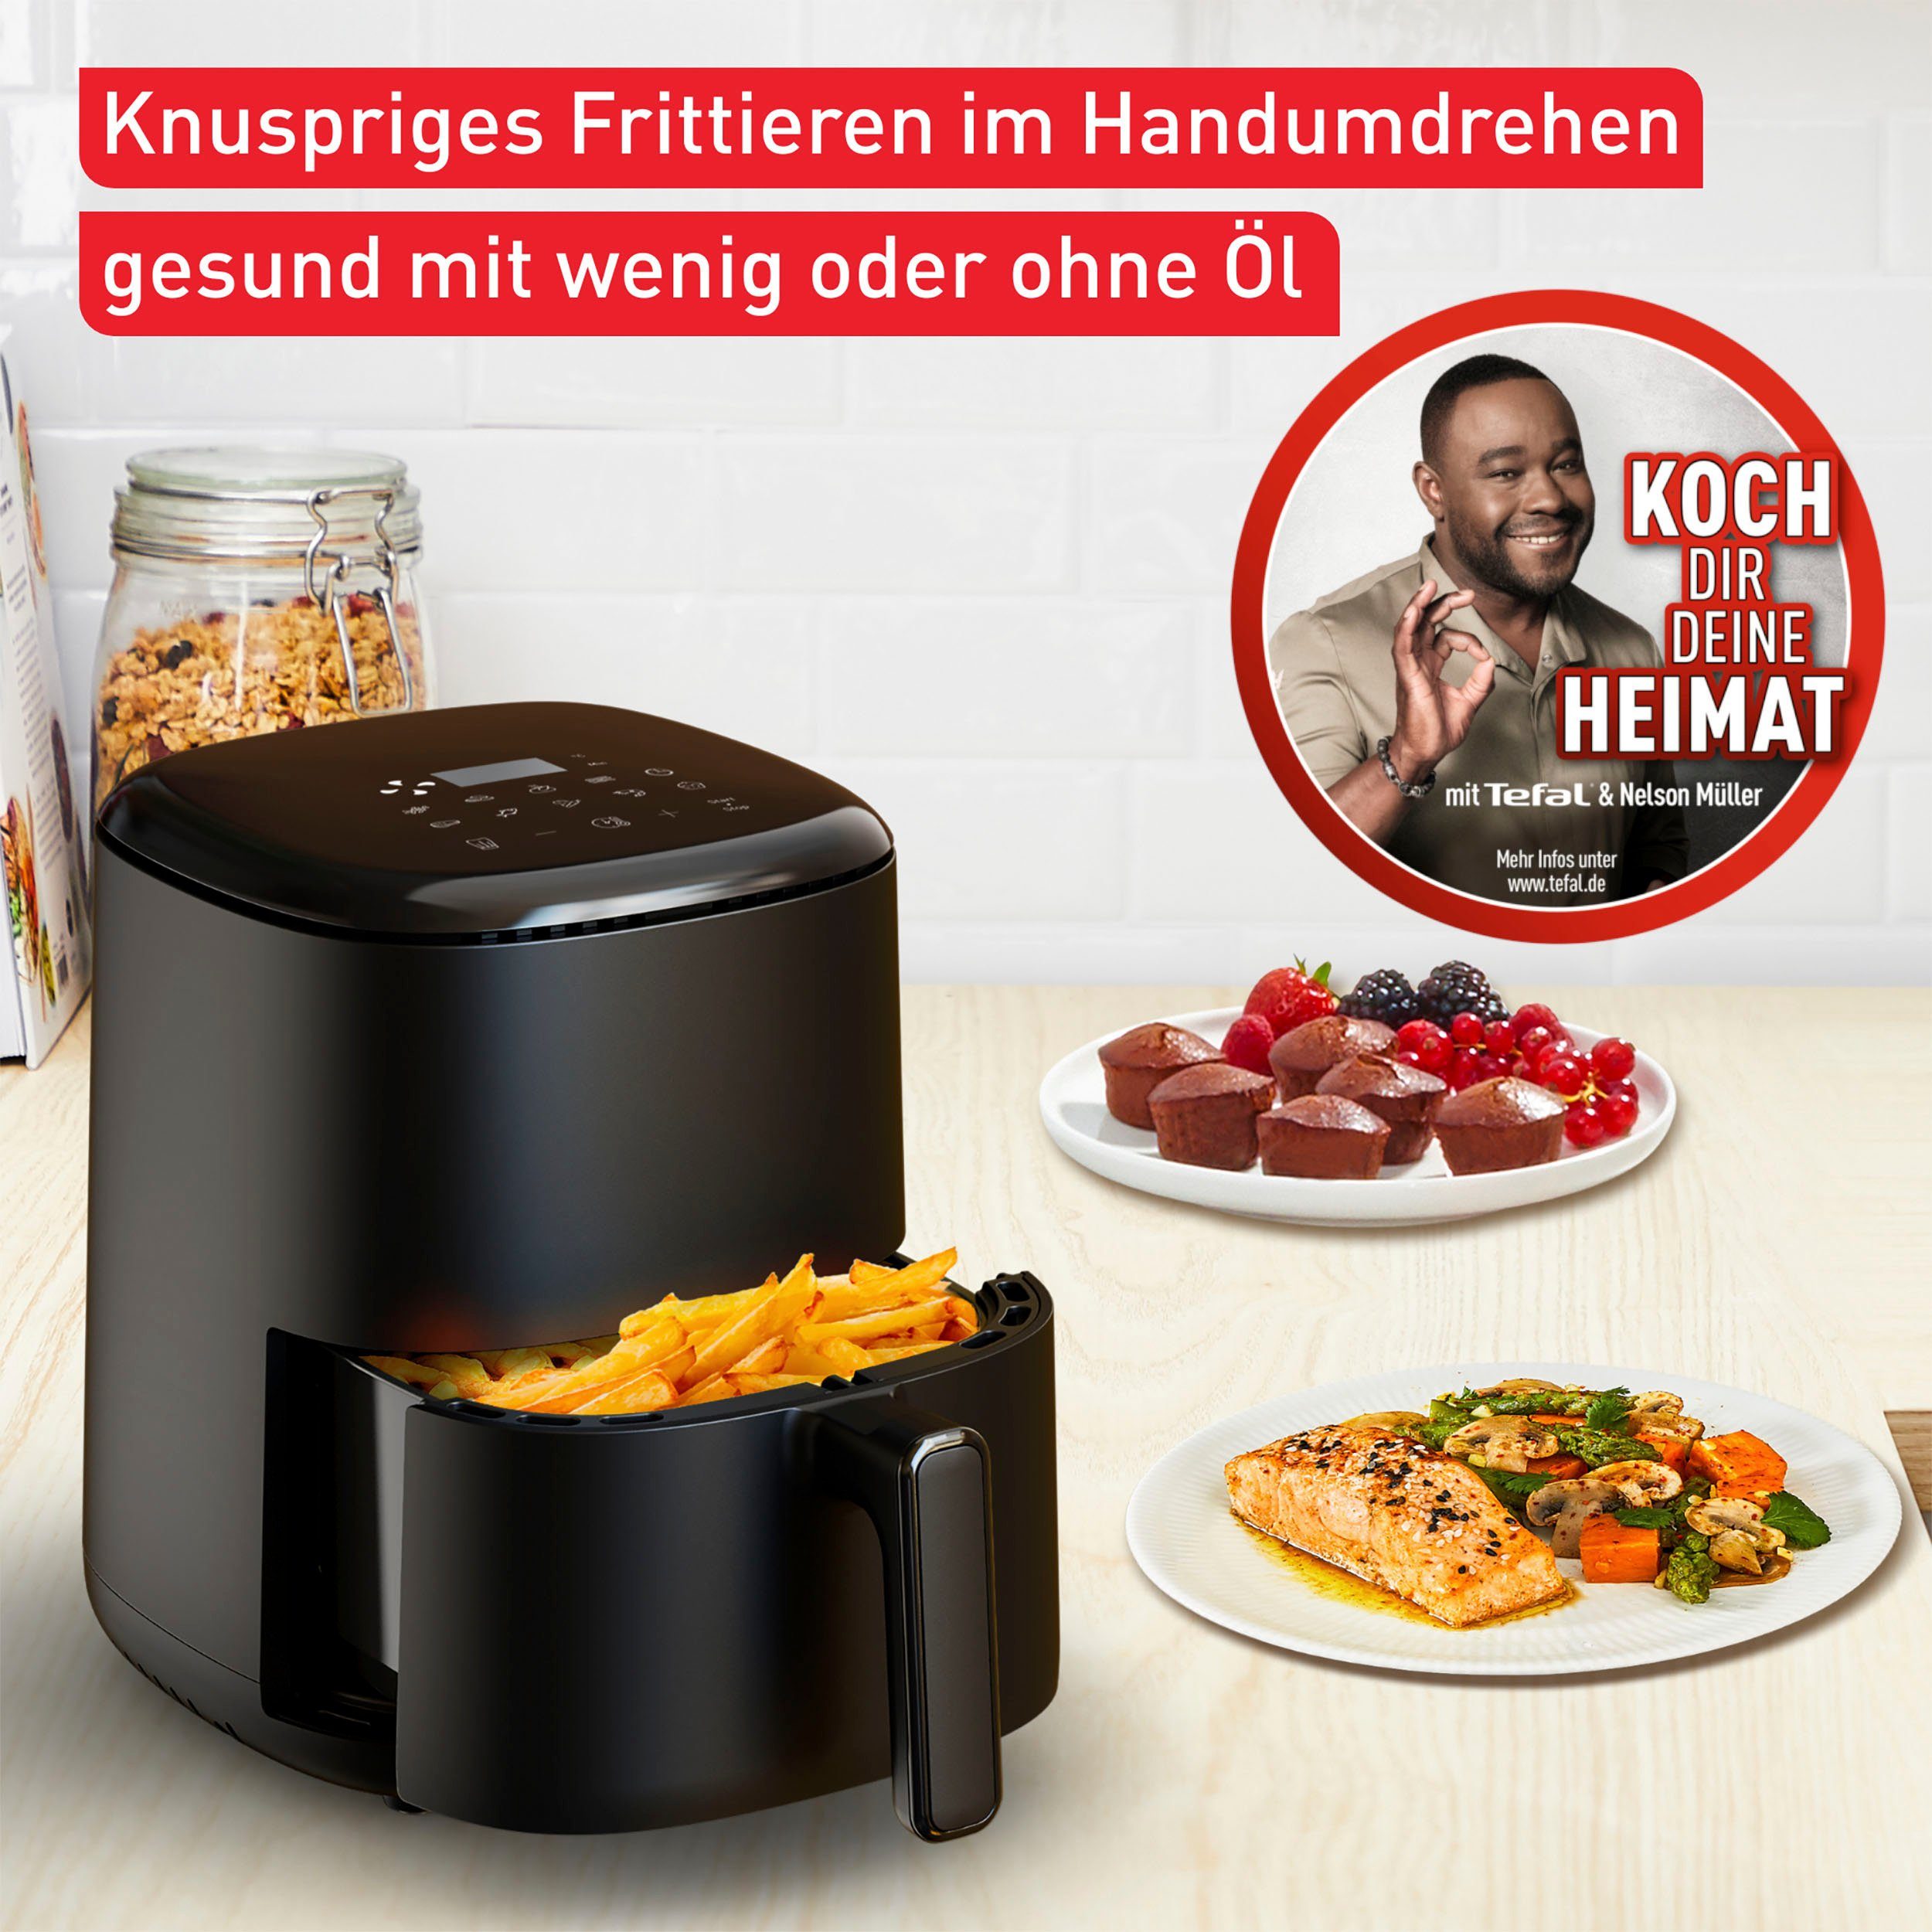 Fry Tefal Heißluftfritteuse EY1458 W 1300 Easy Compact,